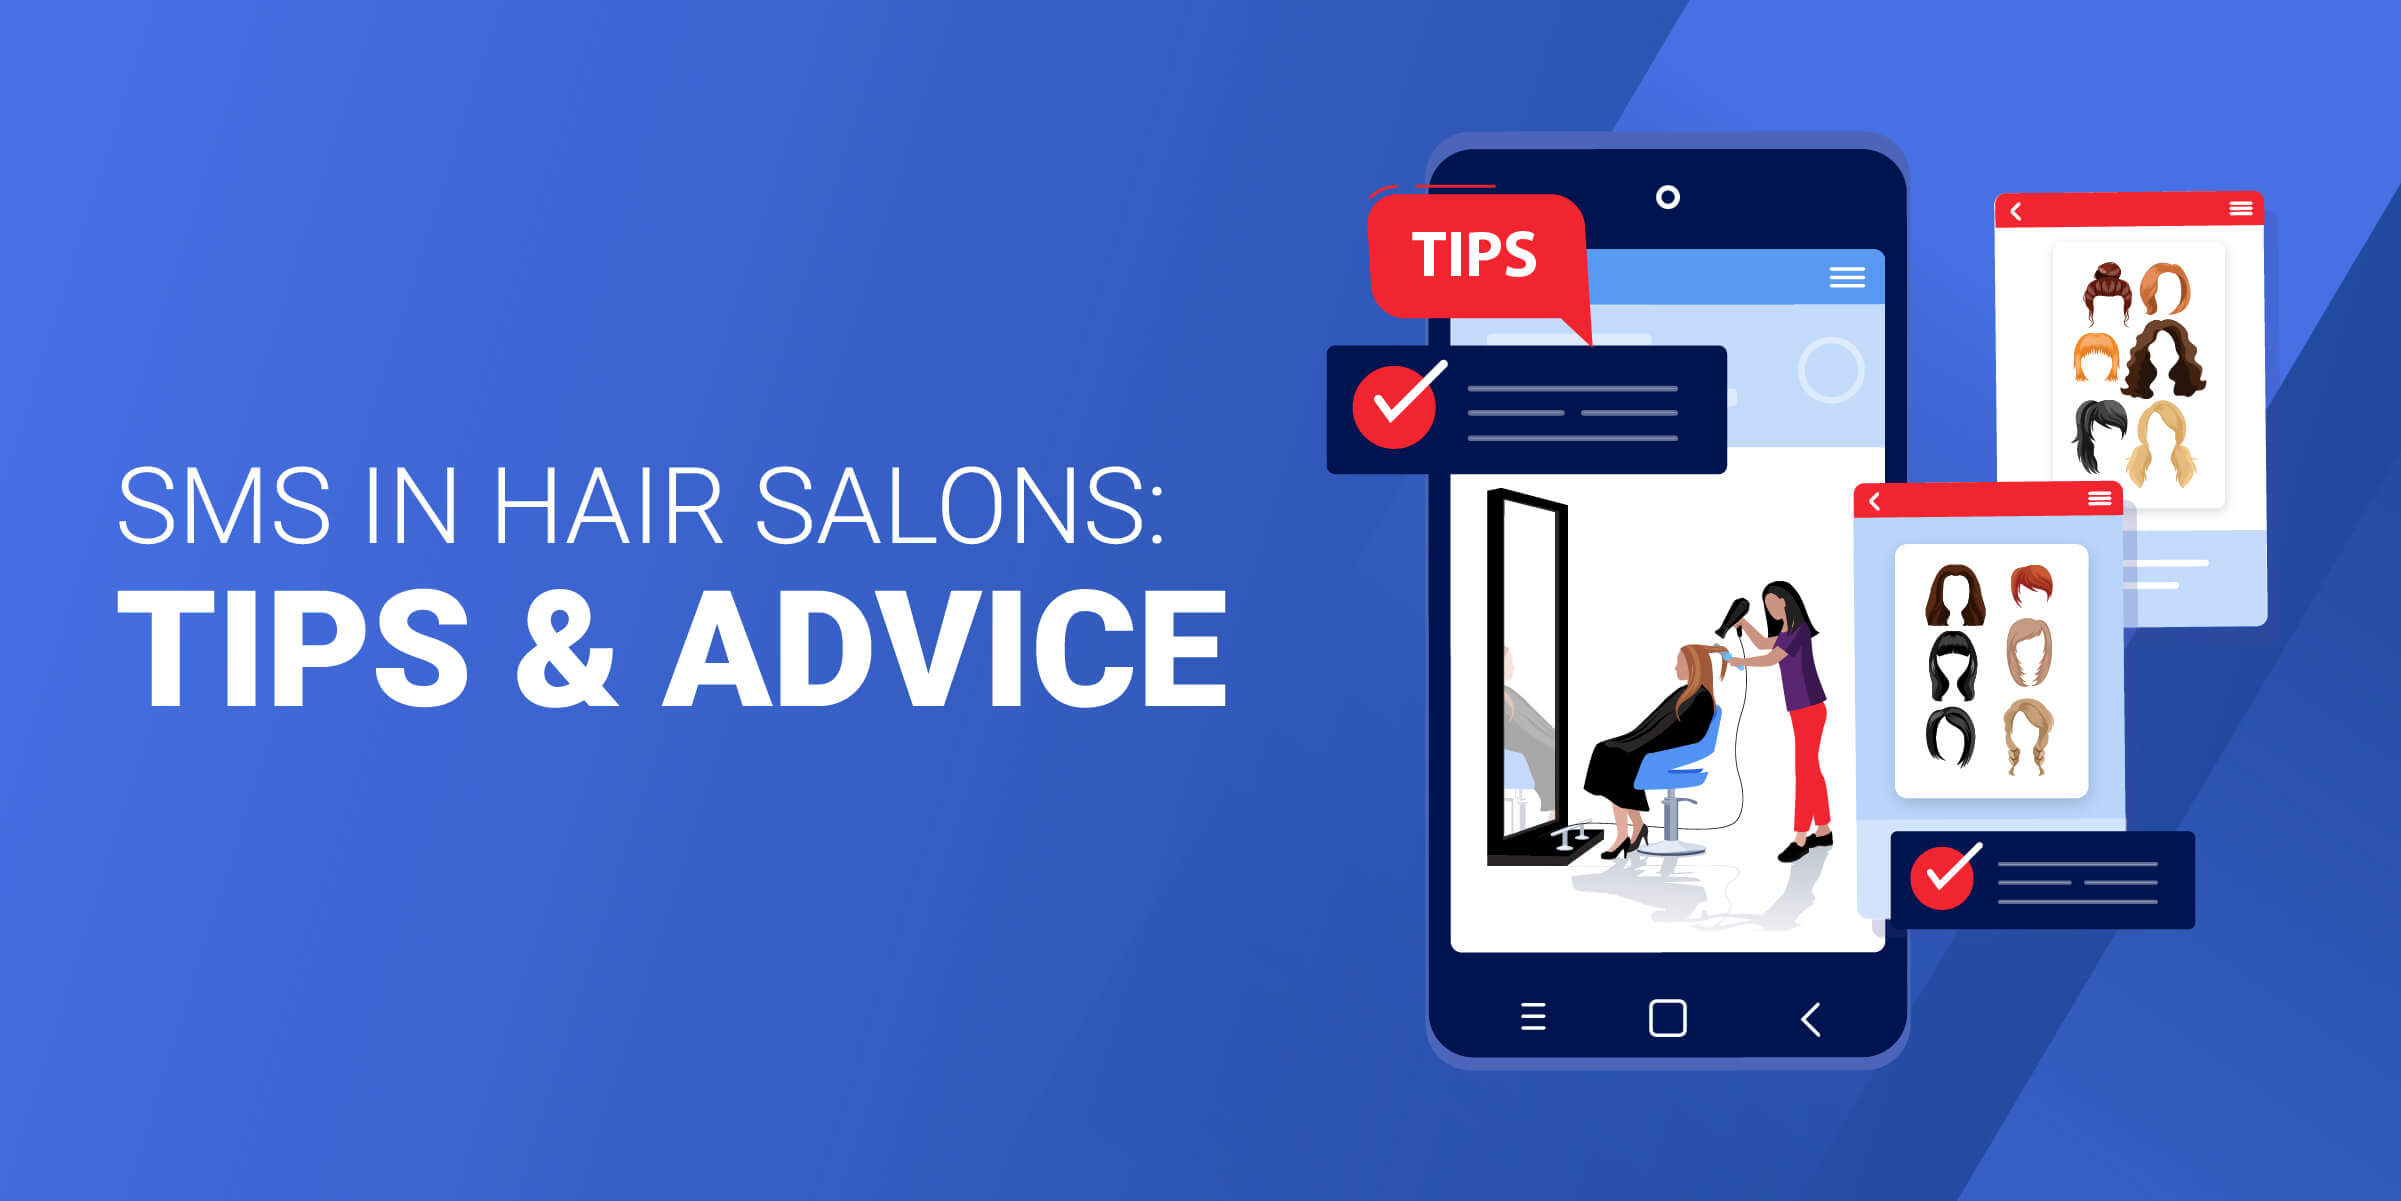 SMS in Hair Salons Tips